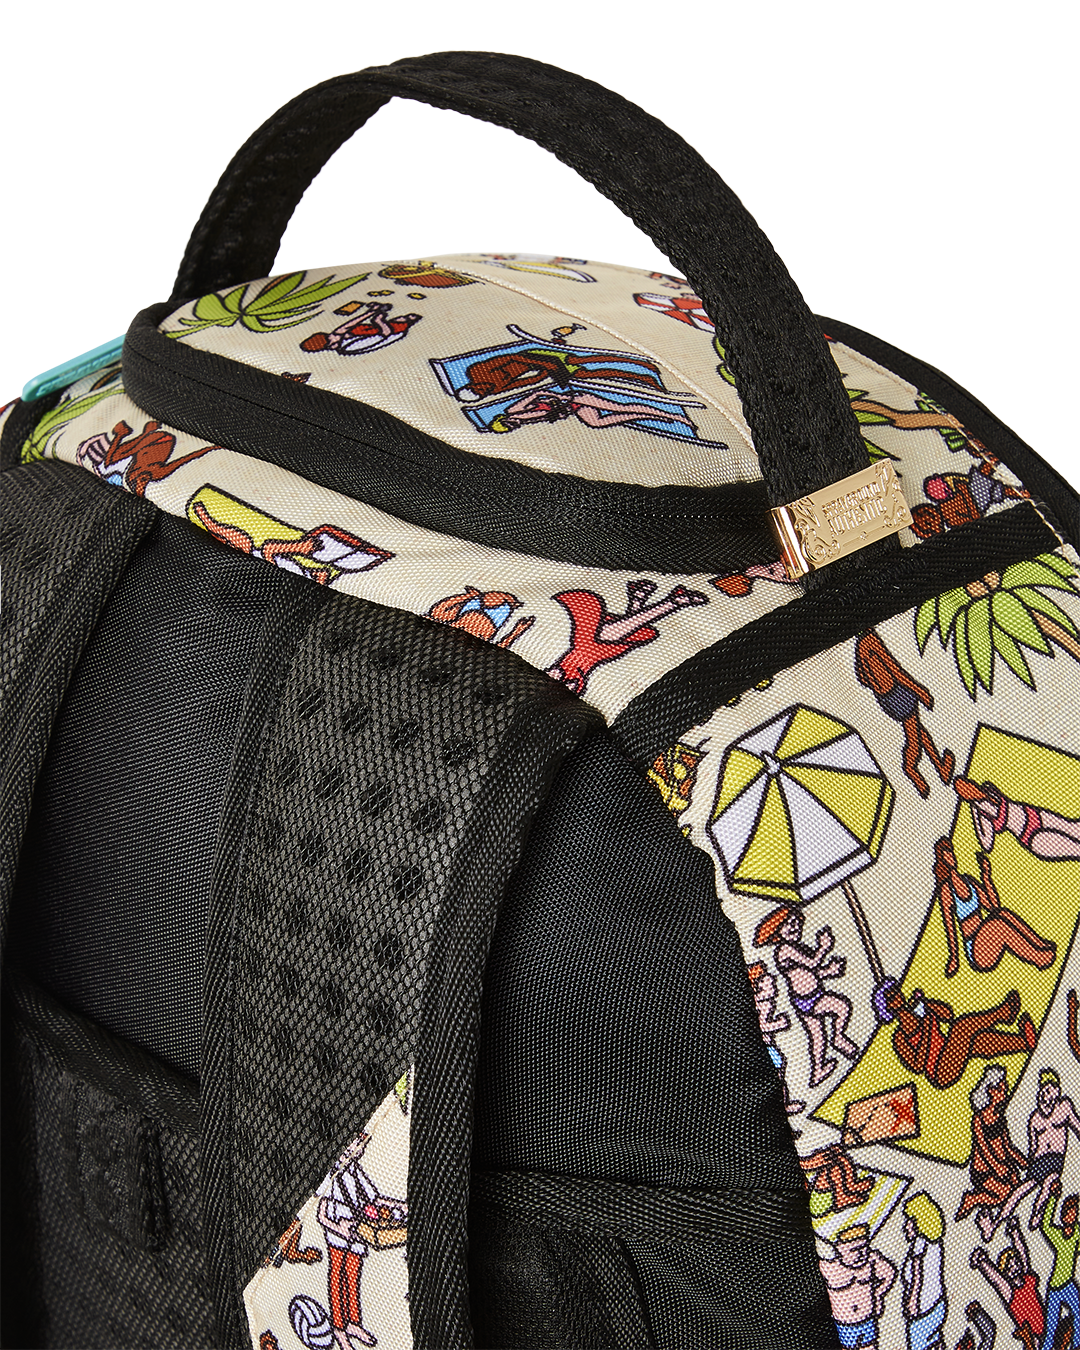 SPRAYGROUND® BACKPACK CHAOS COUNTY BACKPACK